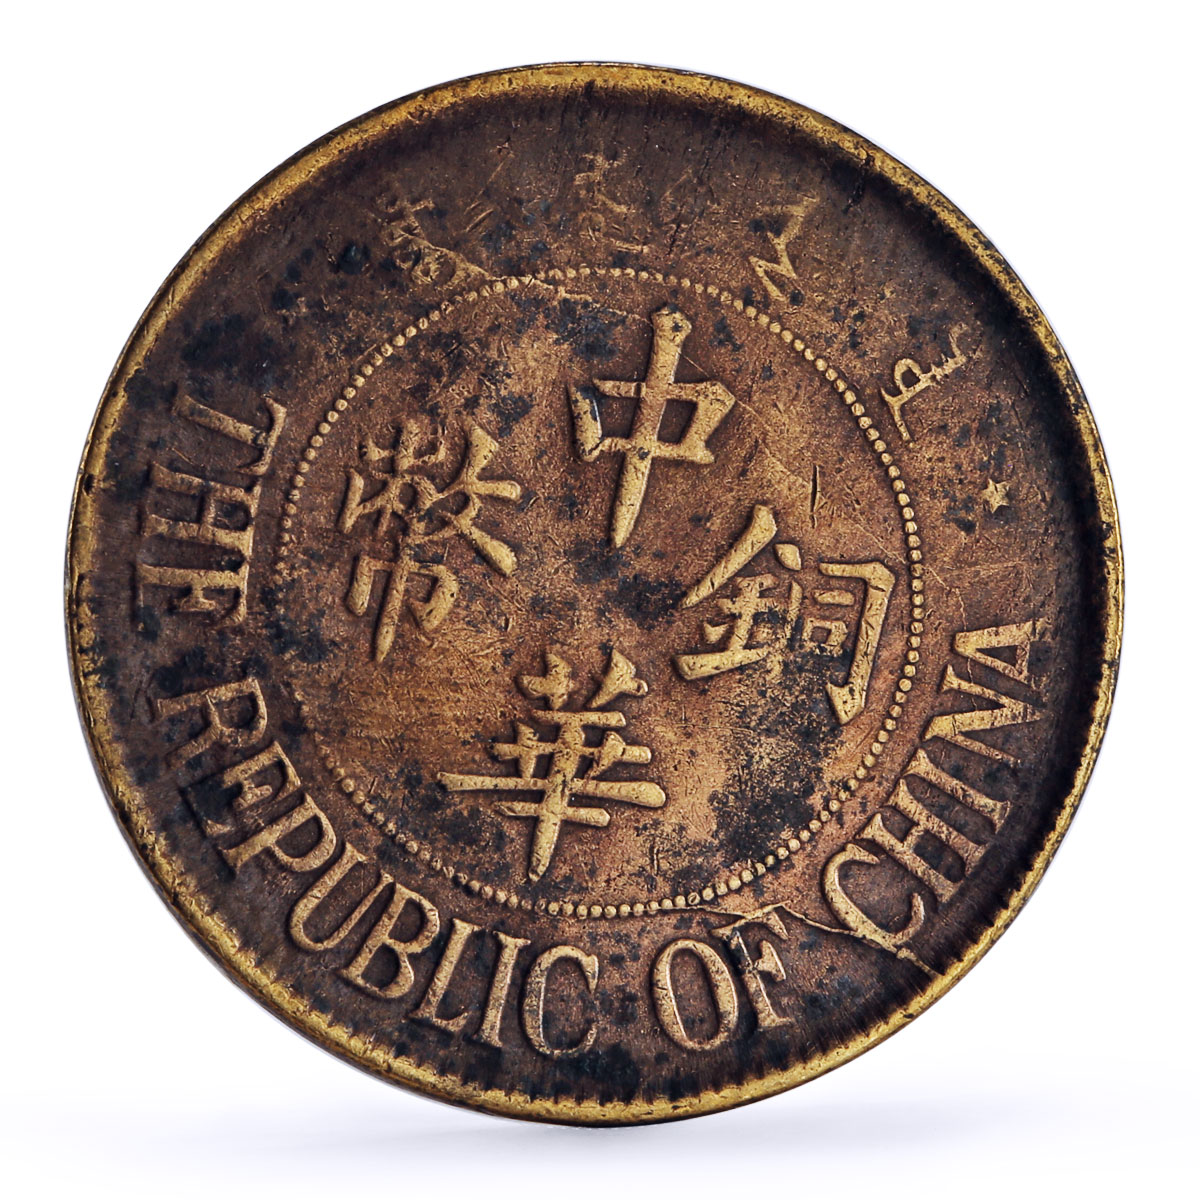 China set of 5 coins Empire and Republic Coinage copper coins 1917 - 1939